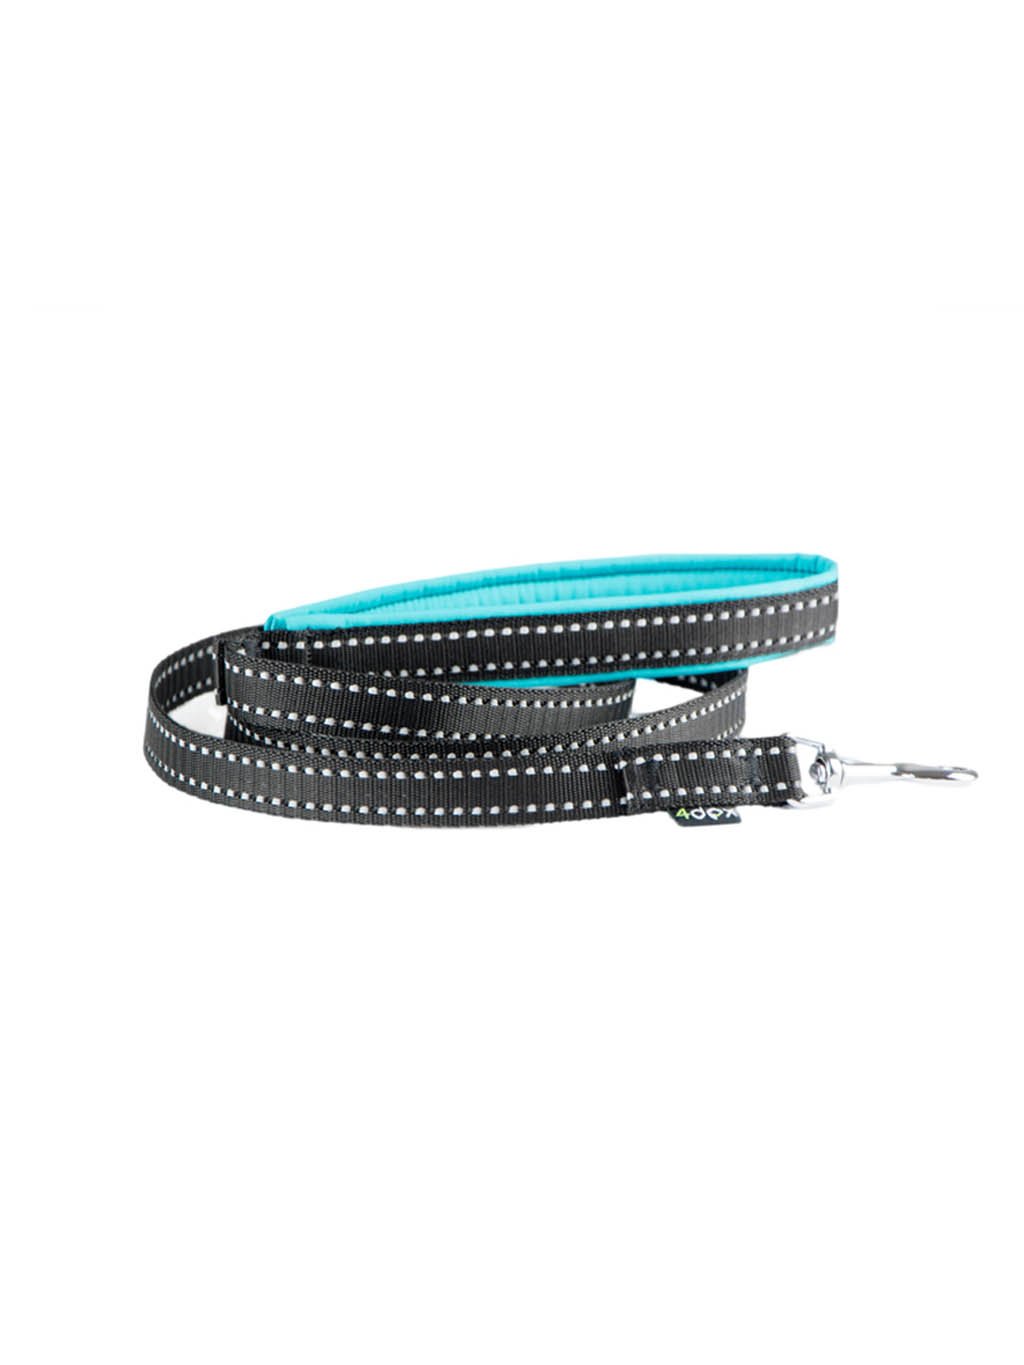 Leash with a reflective tape, CHOCO